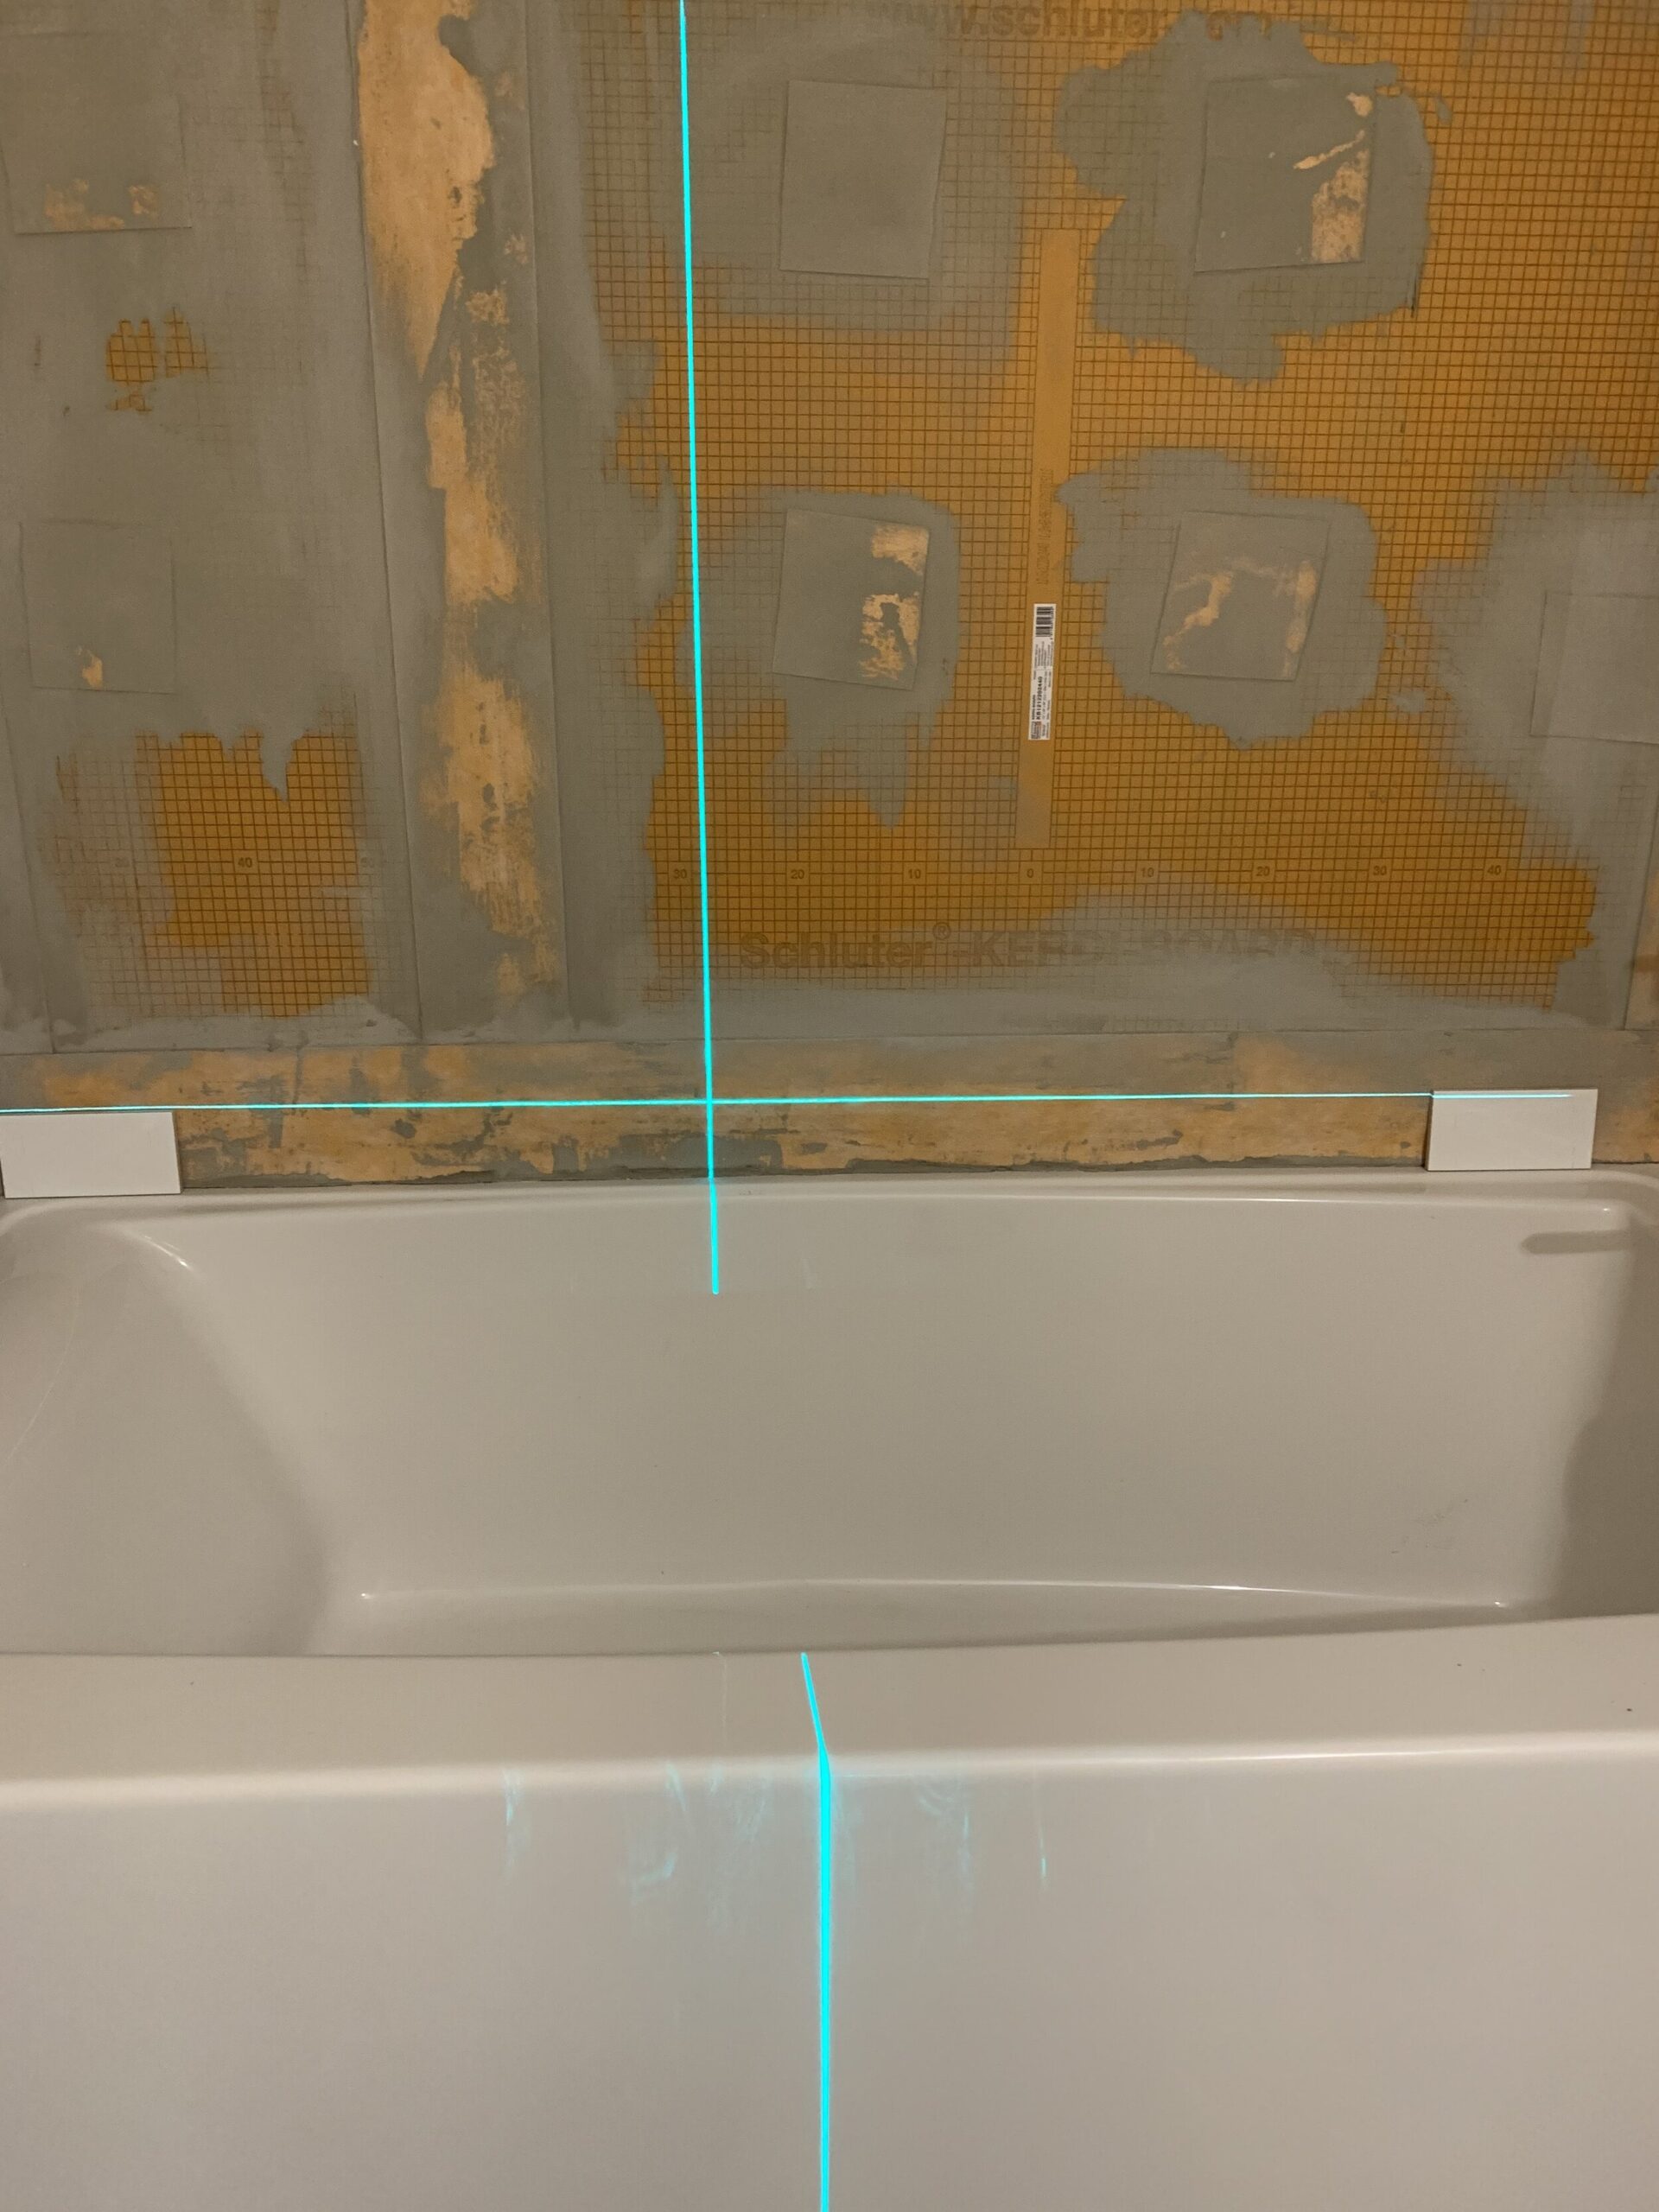 Waterproofed tub surround with laser level marking level line of bottom row of tile